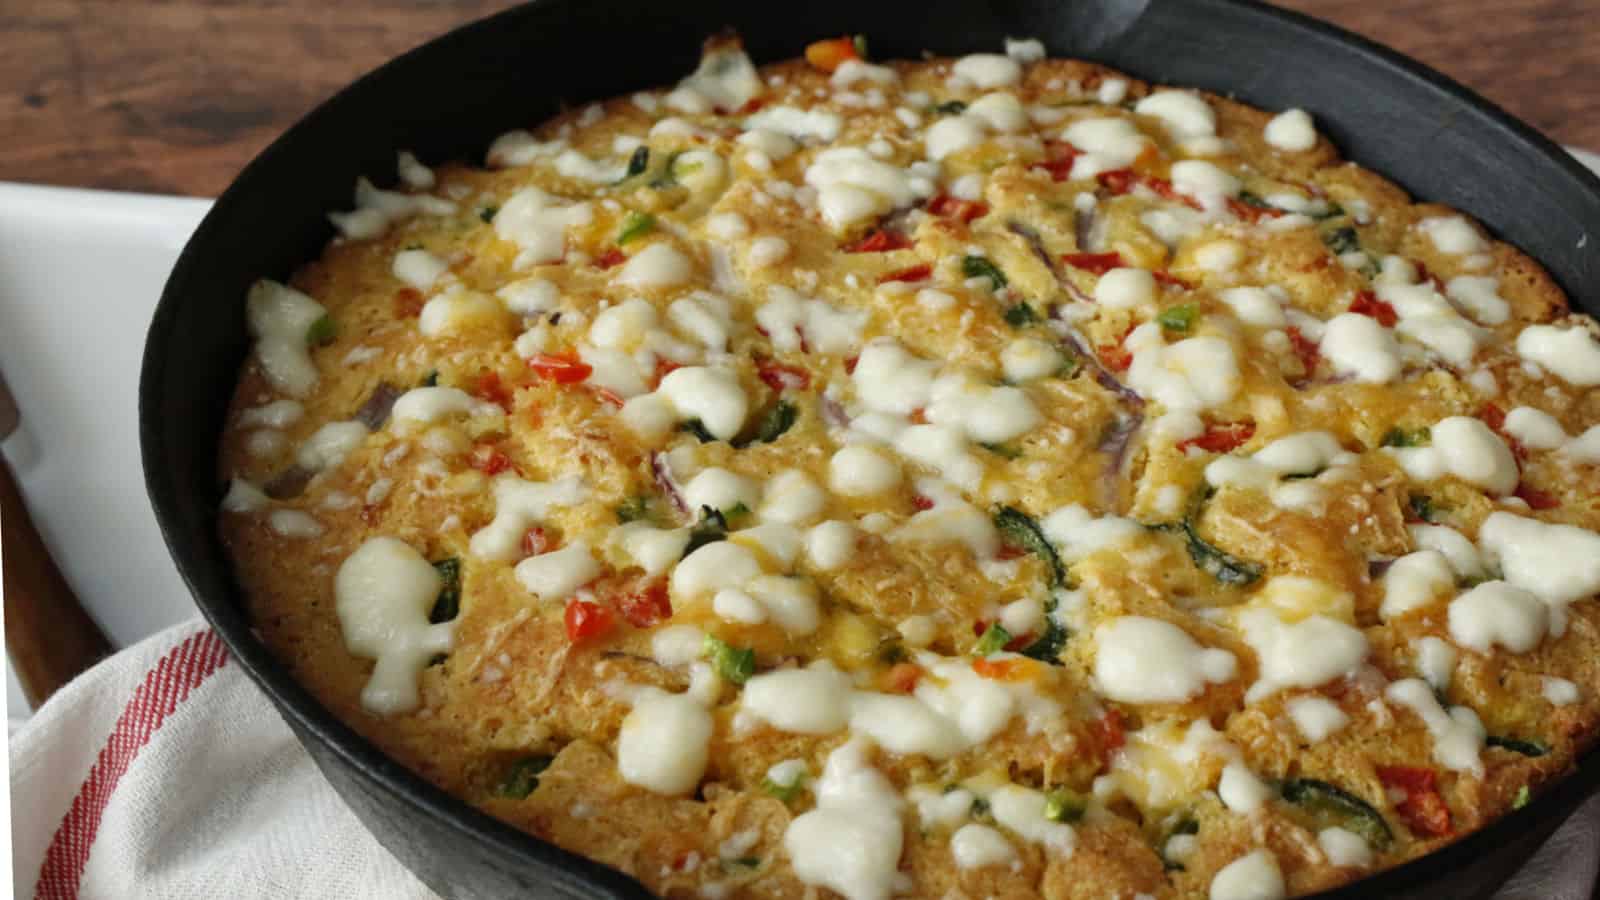 Iron skillet cornbread filled with vegetables and cheese.